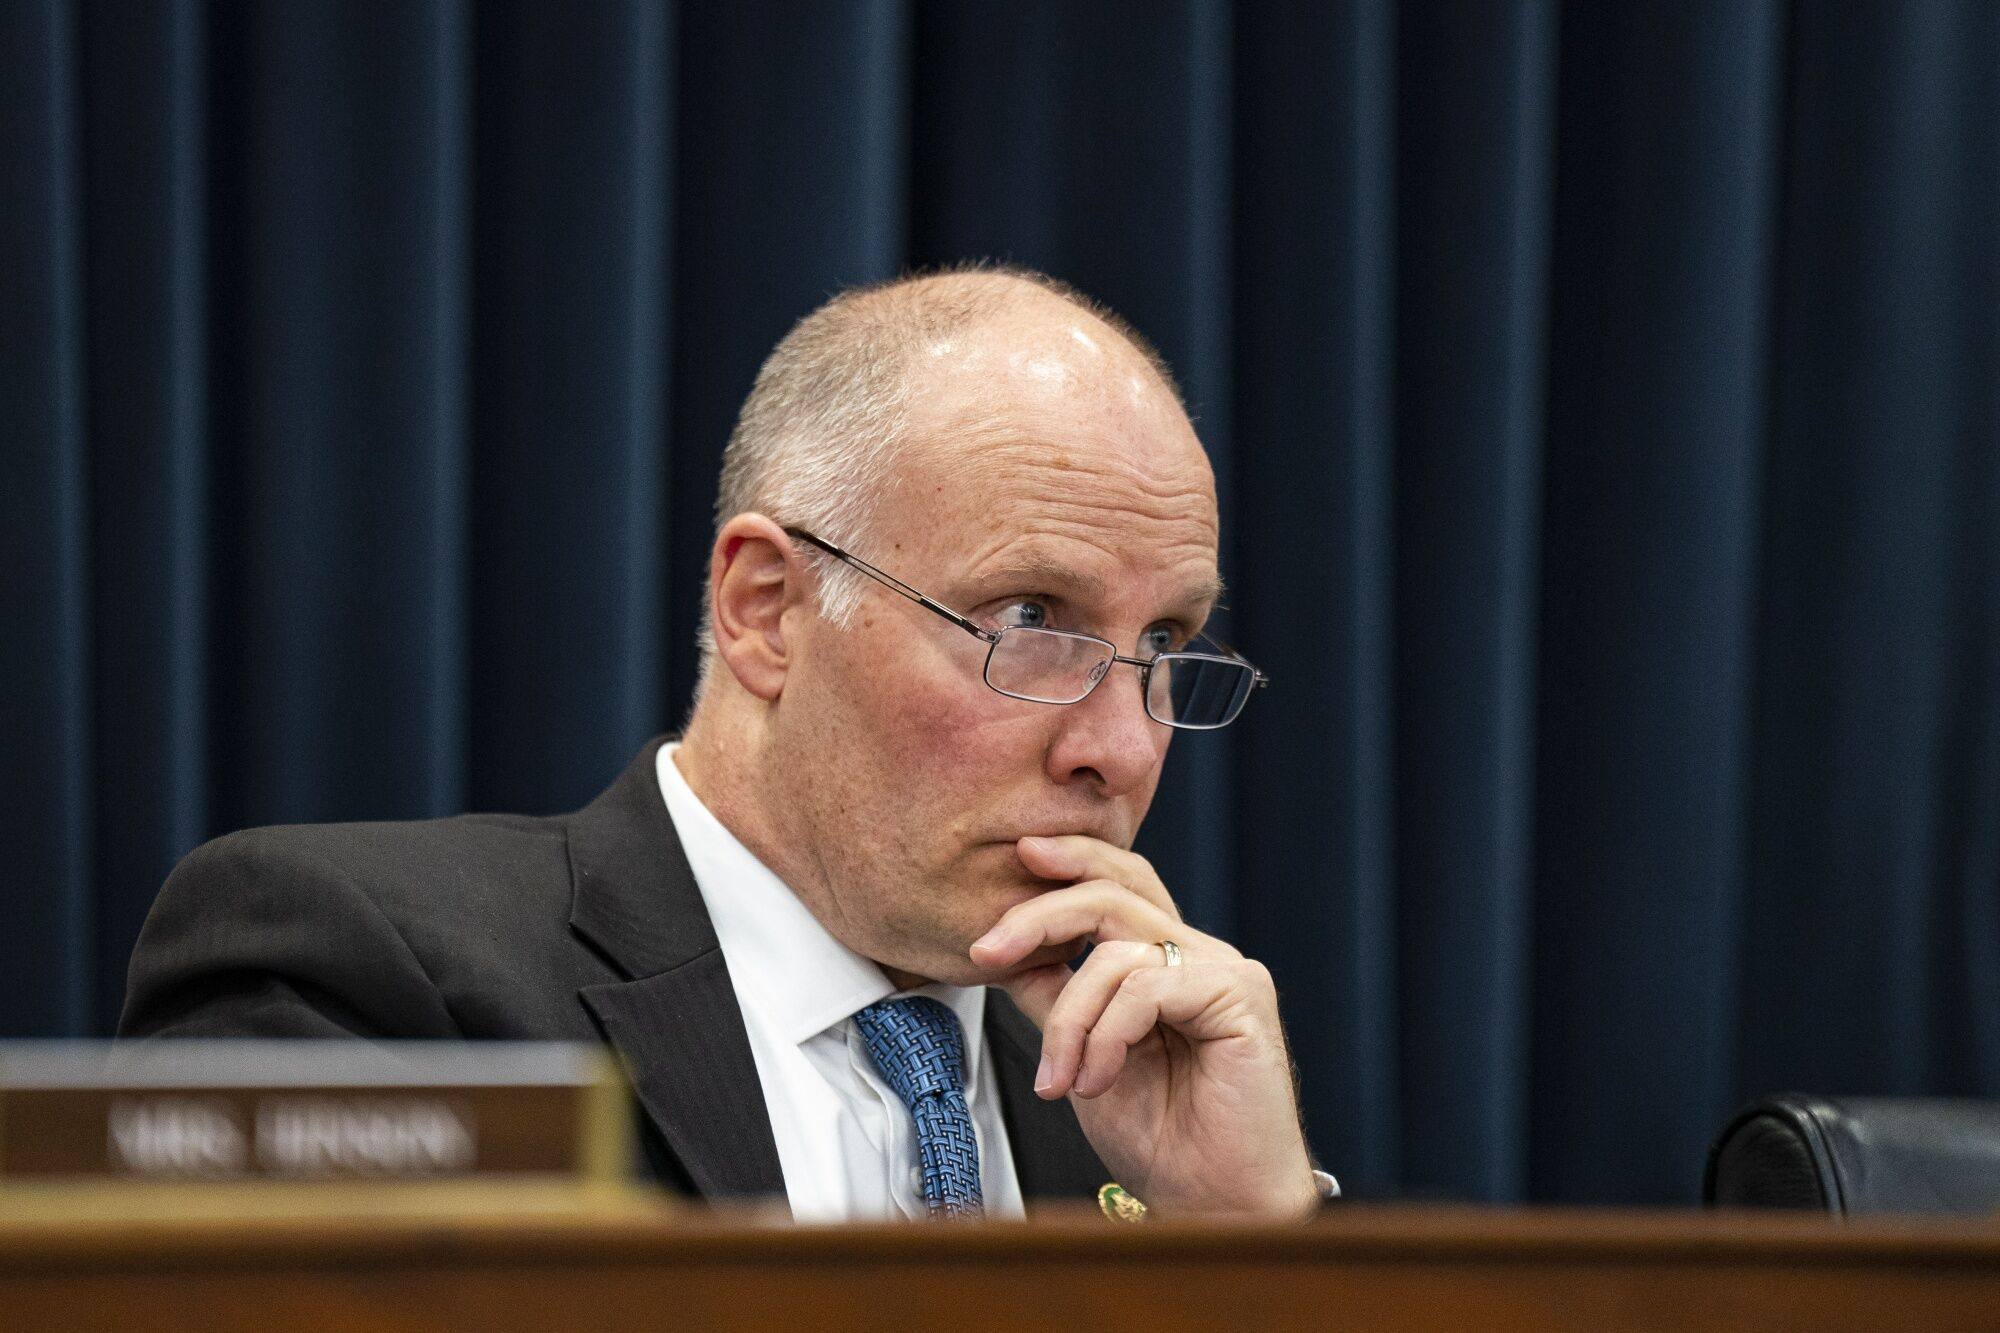 Republican congressman John Moolenaar of Michigan represents Mecosta County, where the Gotion project is based. Photo: Bloomberg